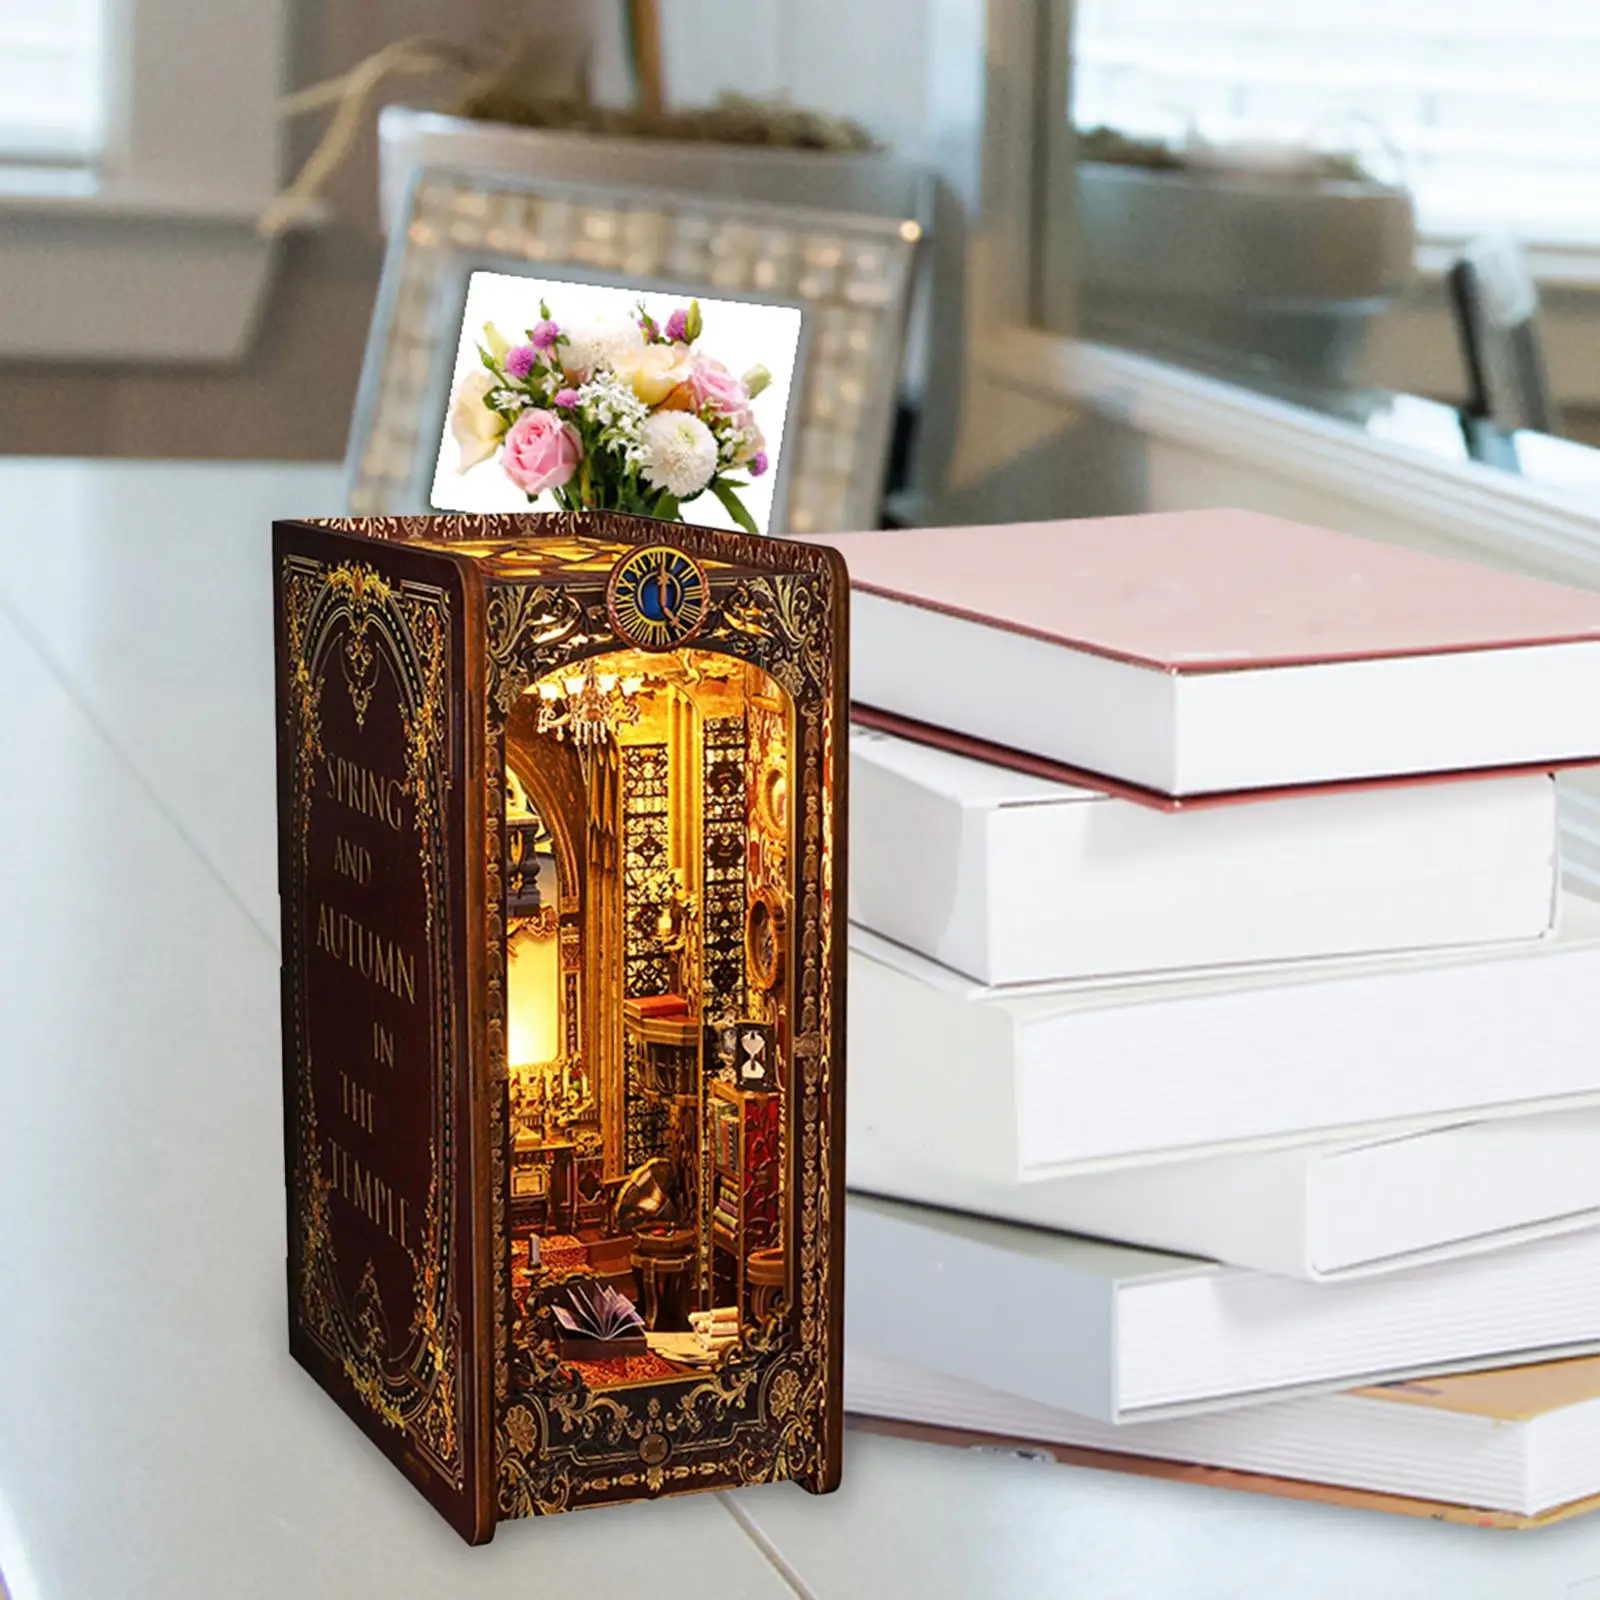 DIY Wooden Alley Booknook Miniature House Bookends Model Build Bookshelf Insert Booknook for Living Room Office Home Decorative